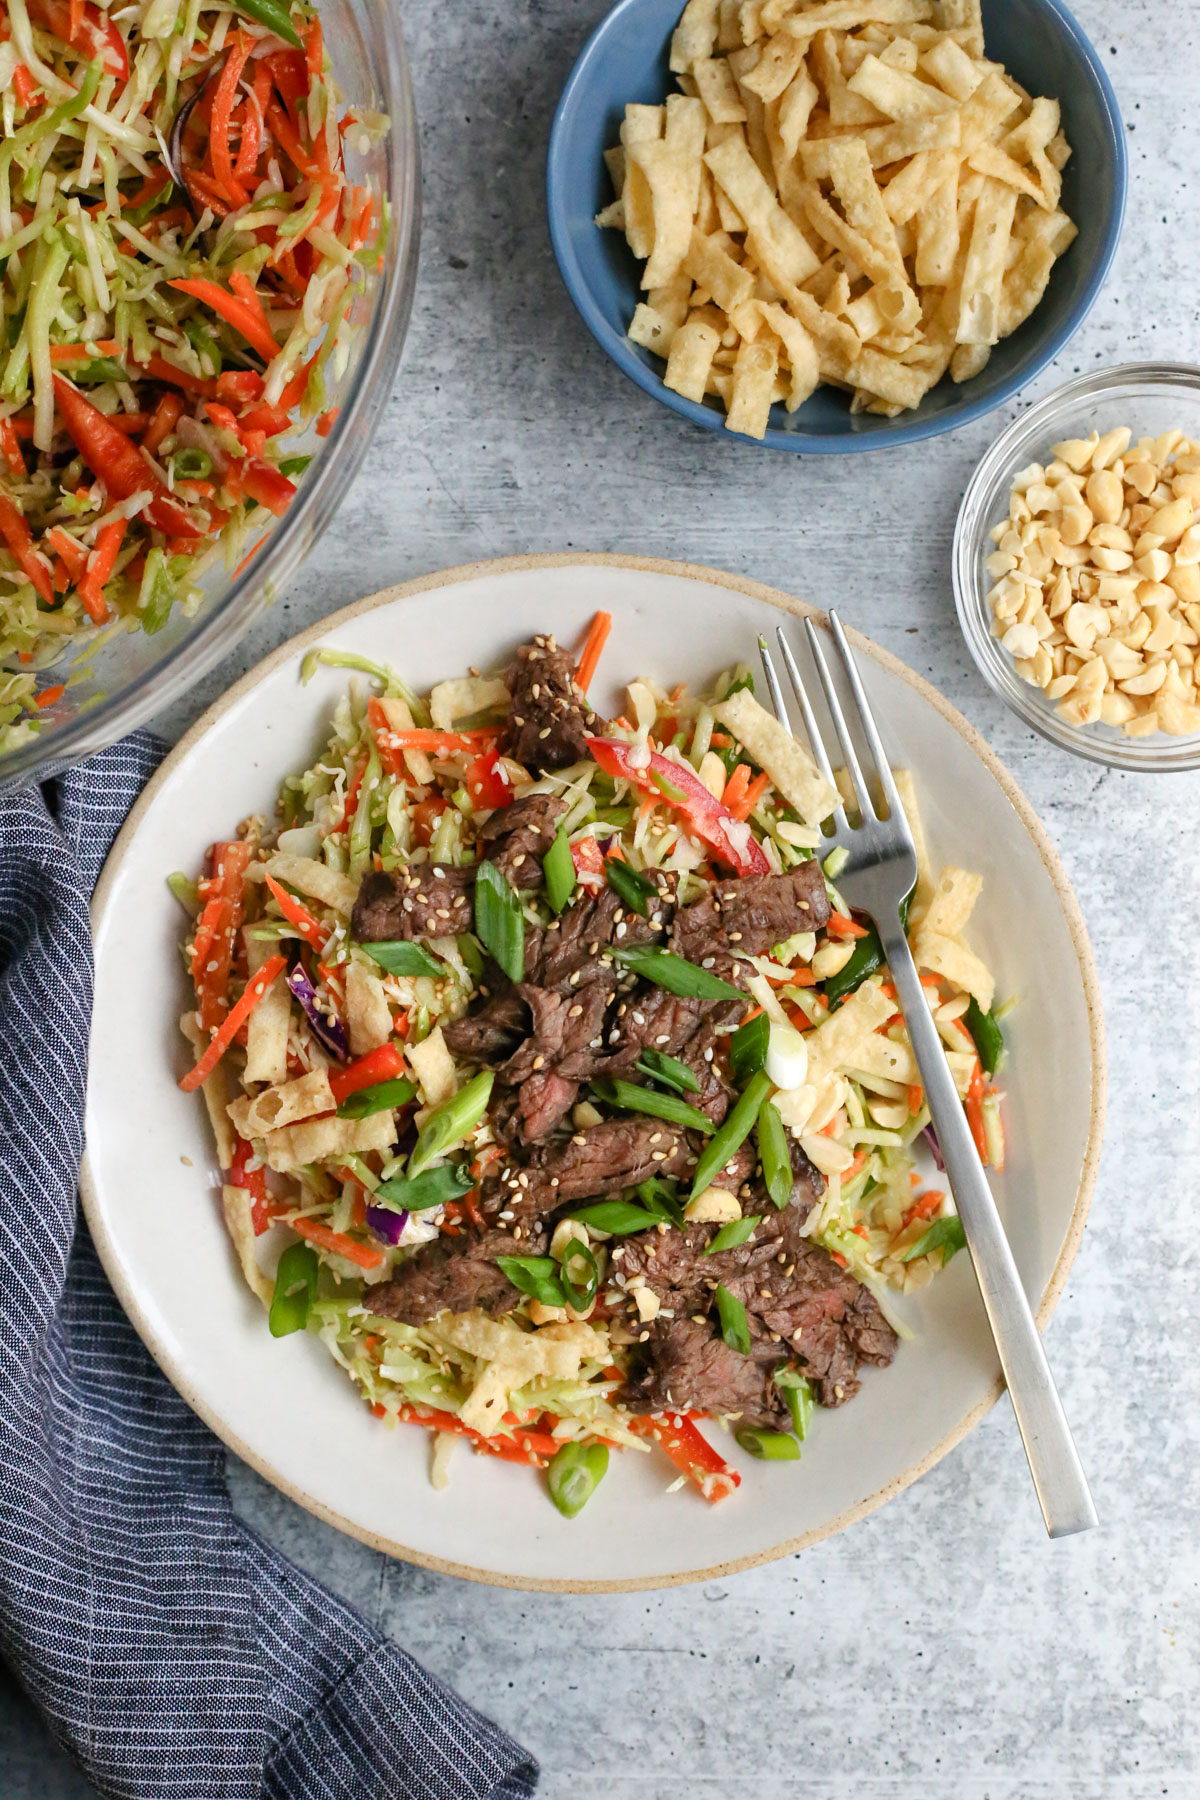 Overhead view of a steak salad made with a skirt steak, shredded vegetables, and a ginger miso dressing